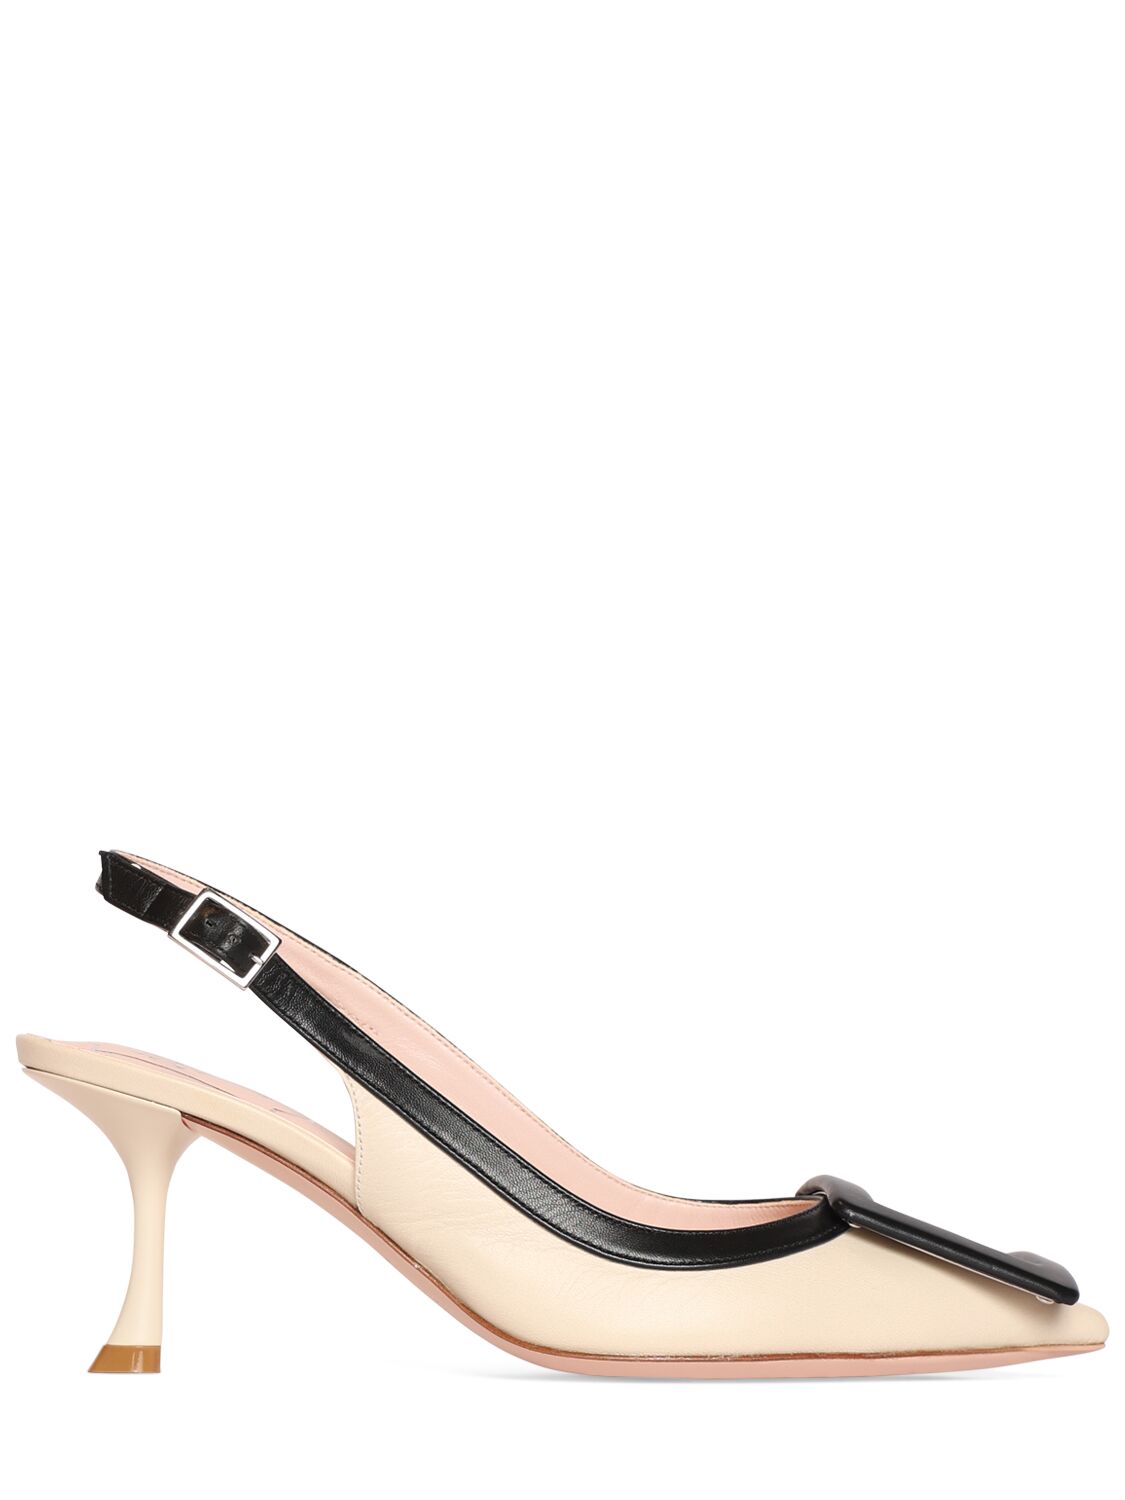 Roger Vivier 65mm Viv In The City Leather Pumps In Black,off-white